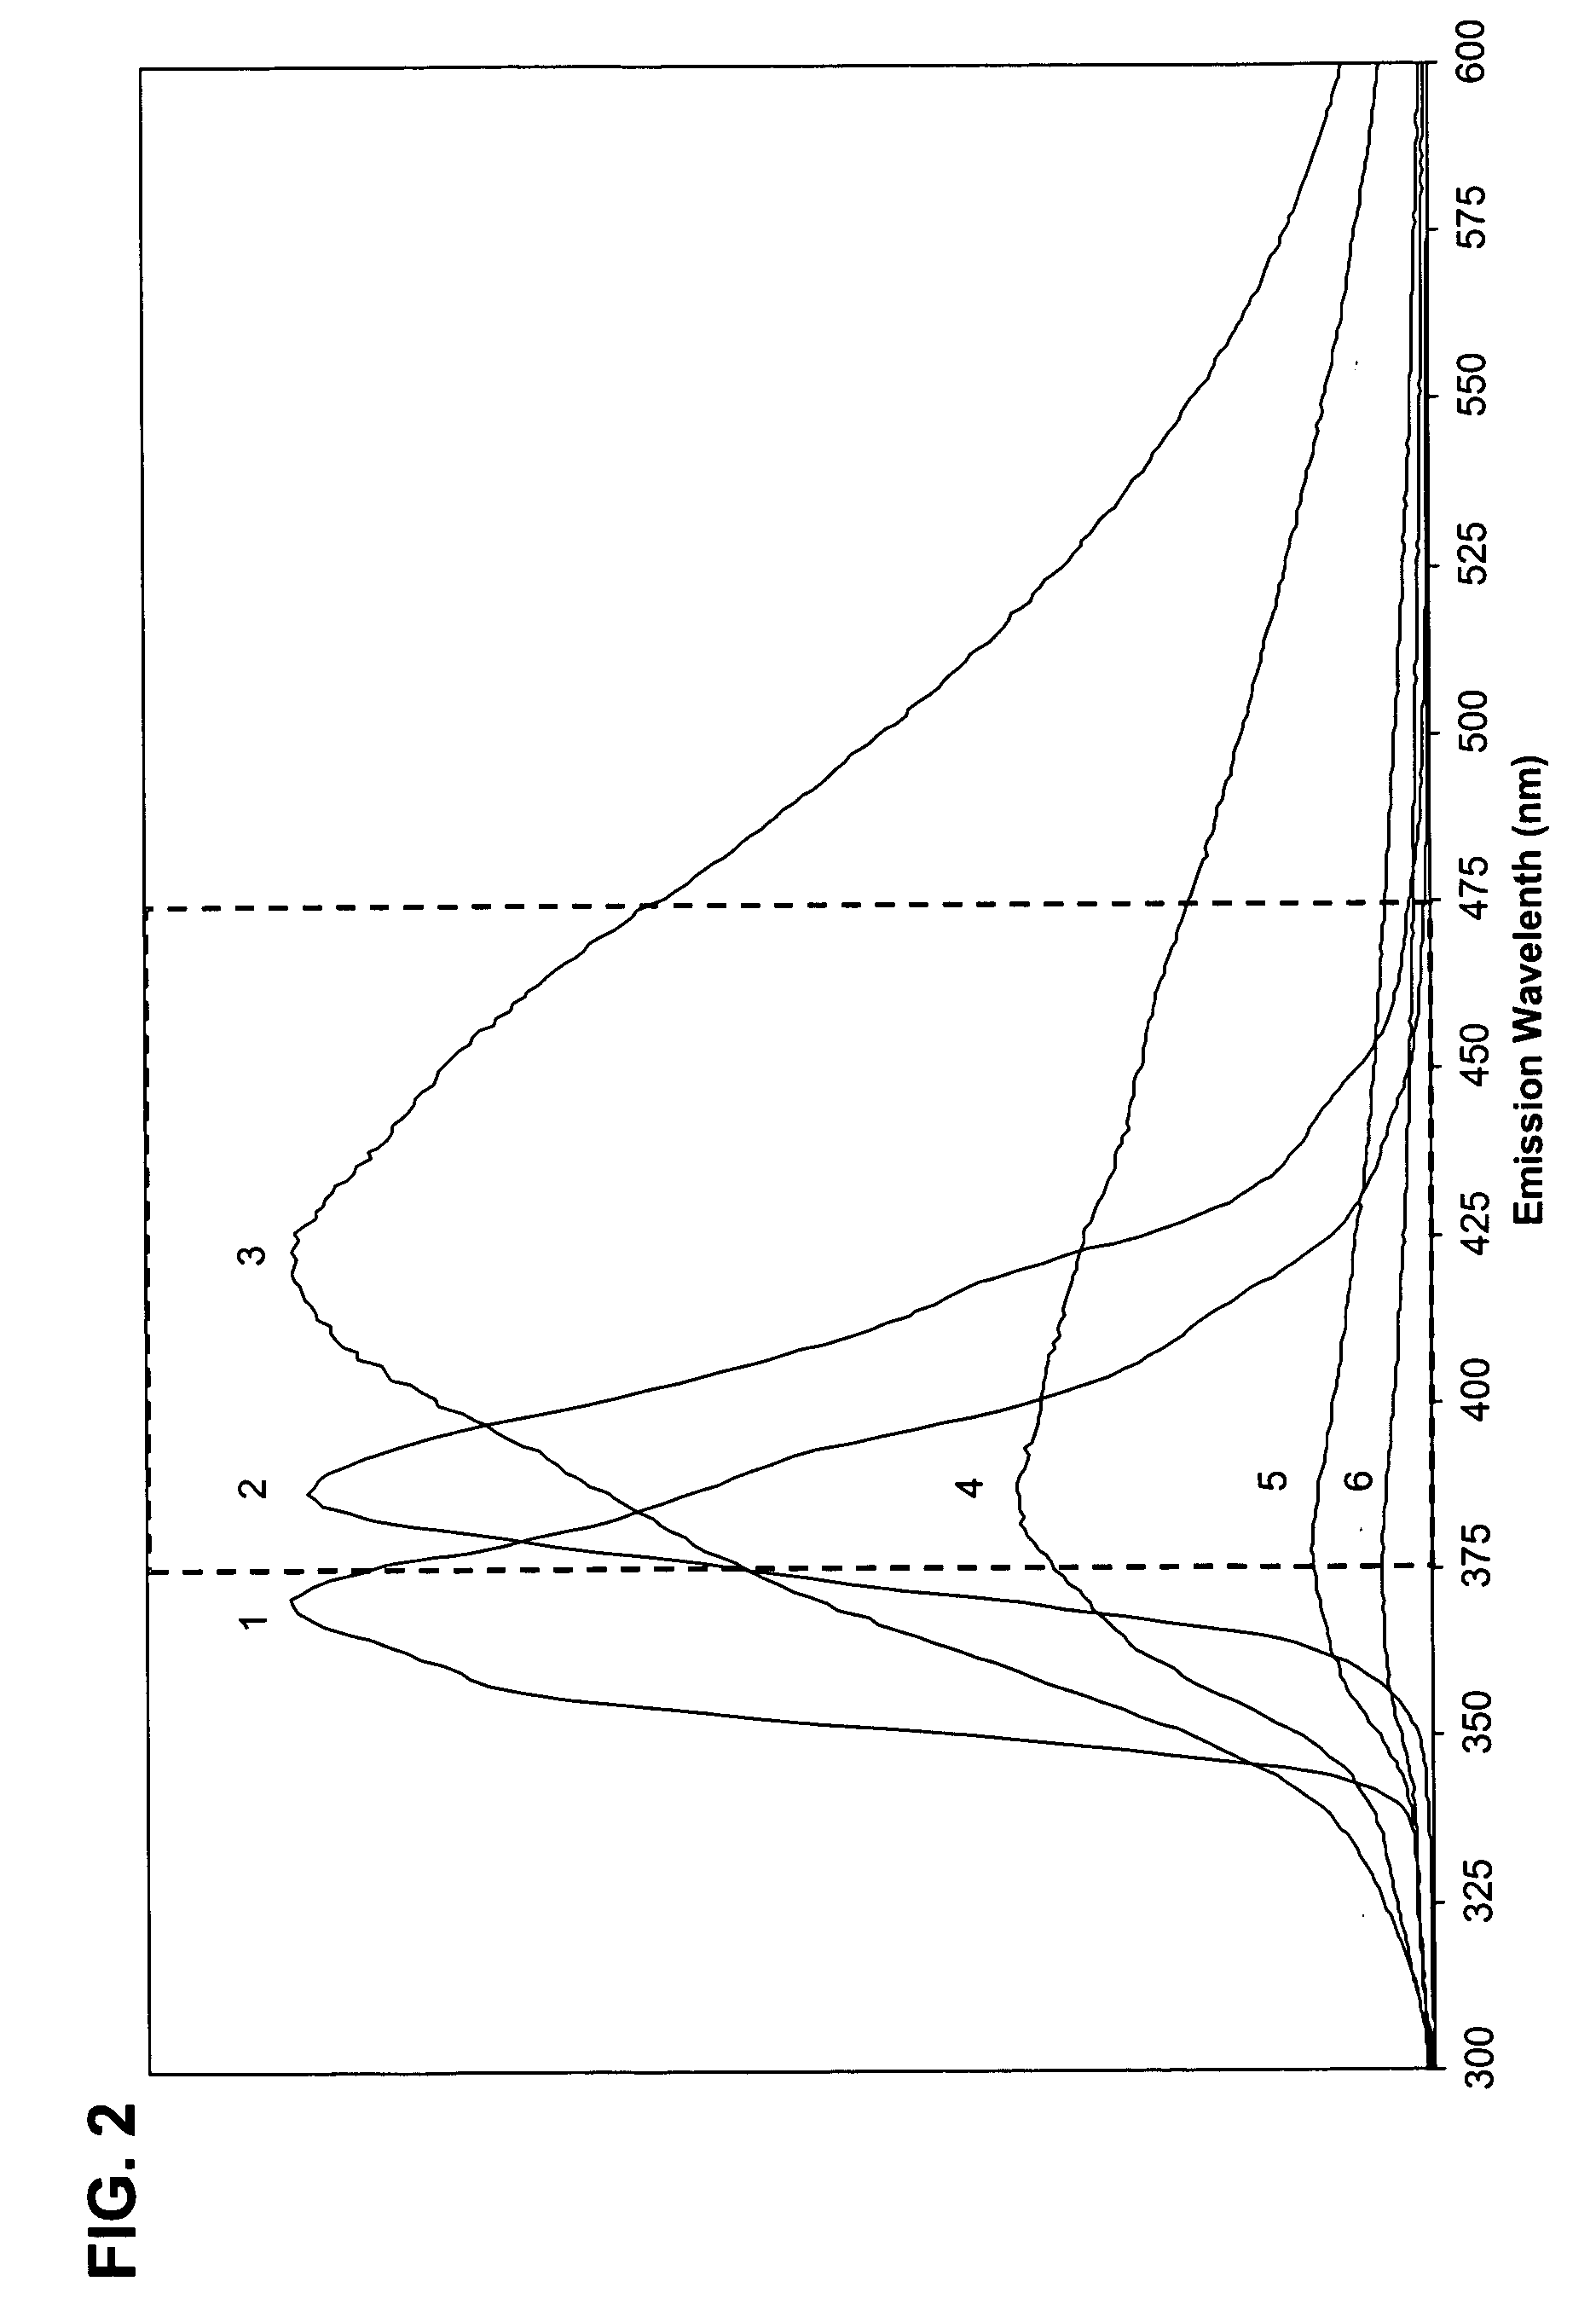 Method for determining whether a rock is capable of functioning as an oil reservoir